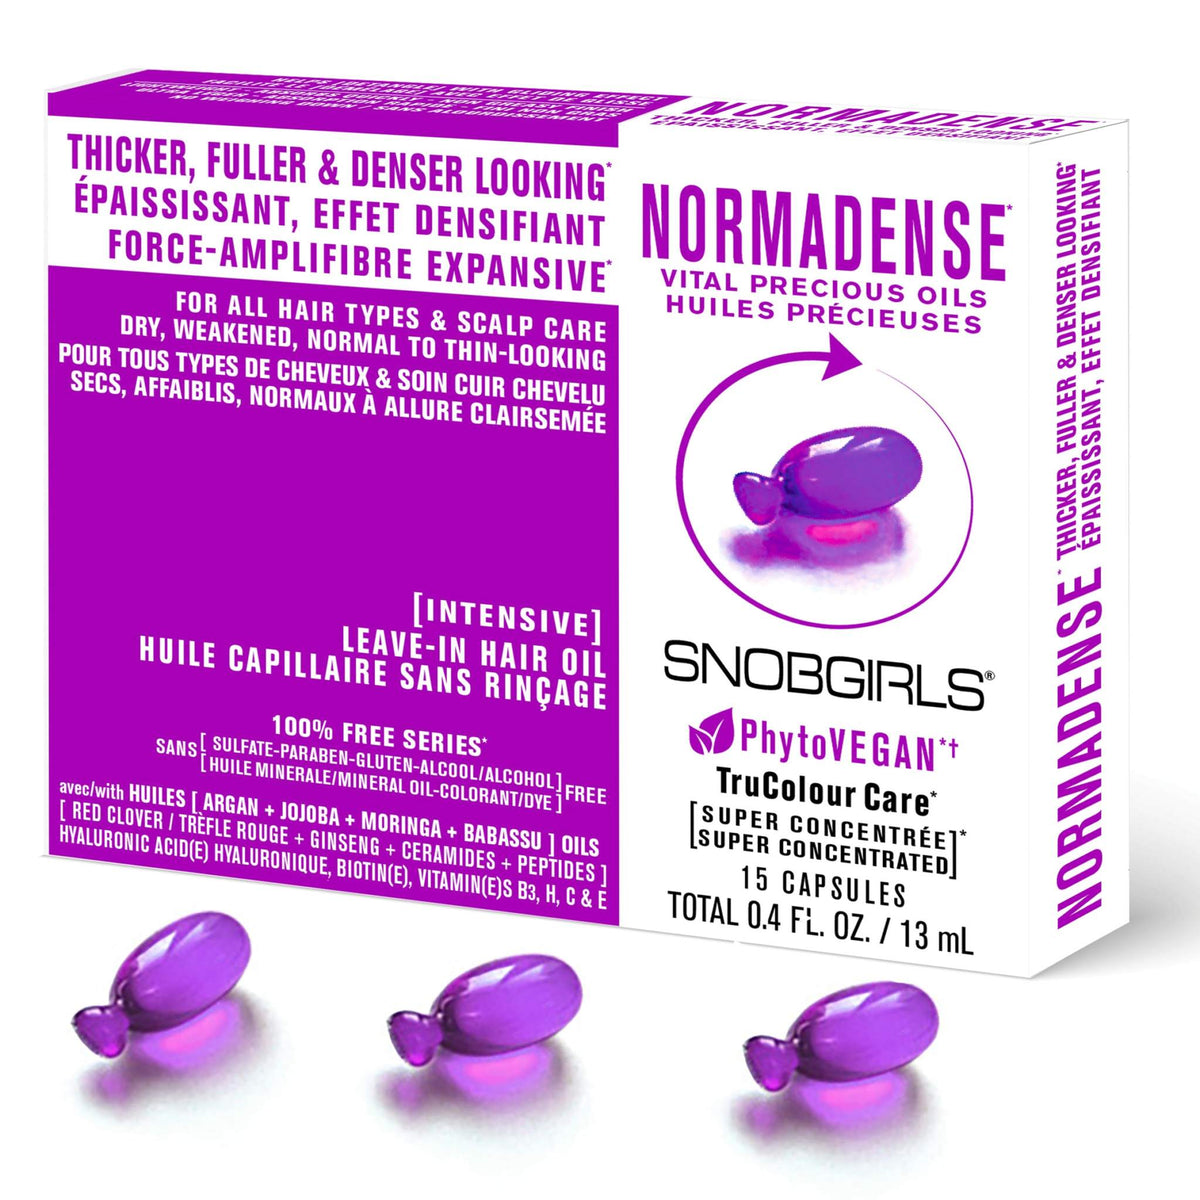 NORMADENSE Huile Capillaire avec Huile d’Argan, Trèfle Rouge, Ginseng, Peptides, Biotine, Acide Hyaluronique &amp; Vitamines
